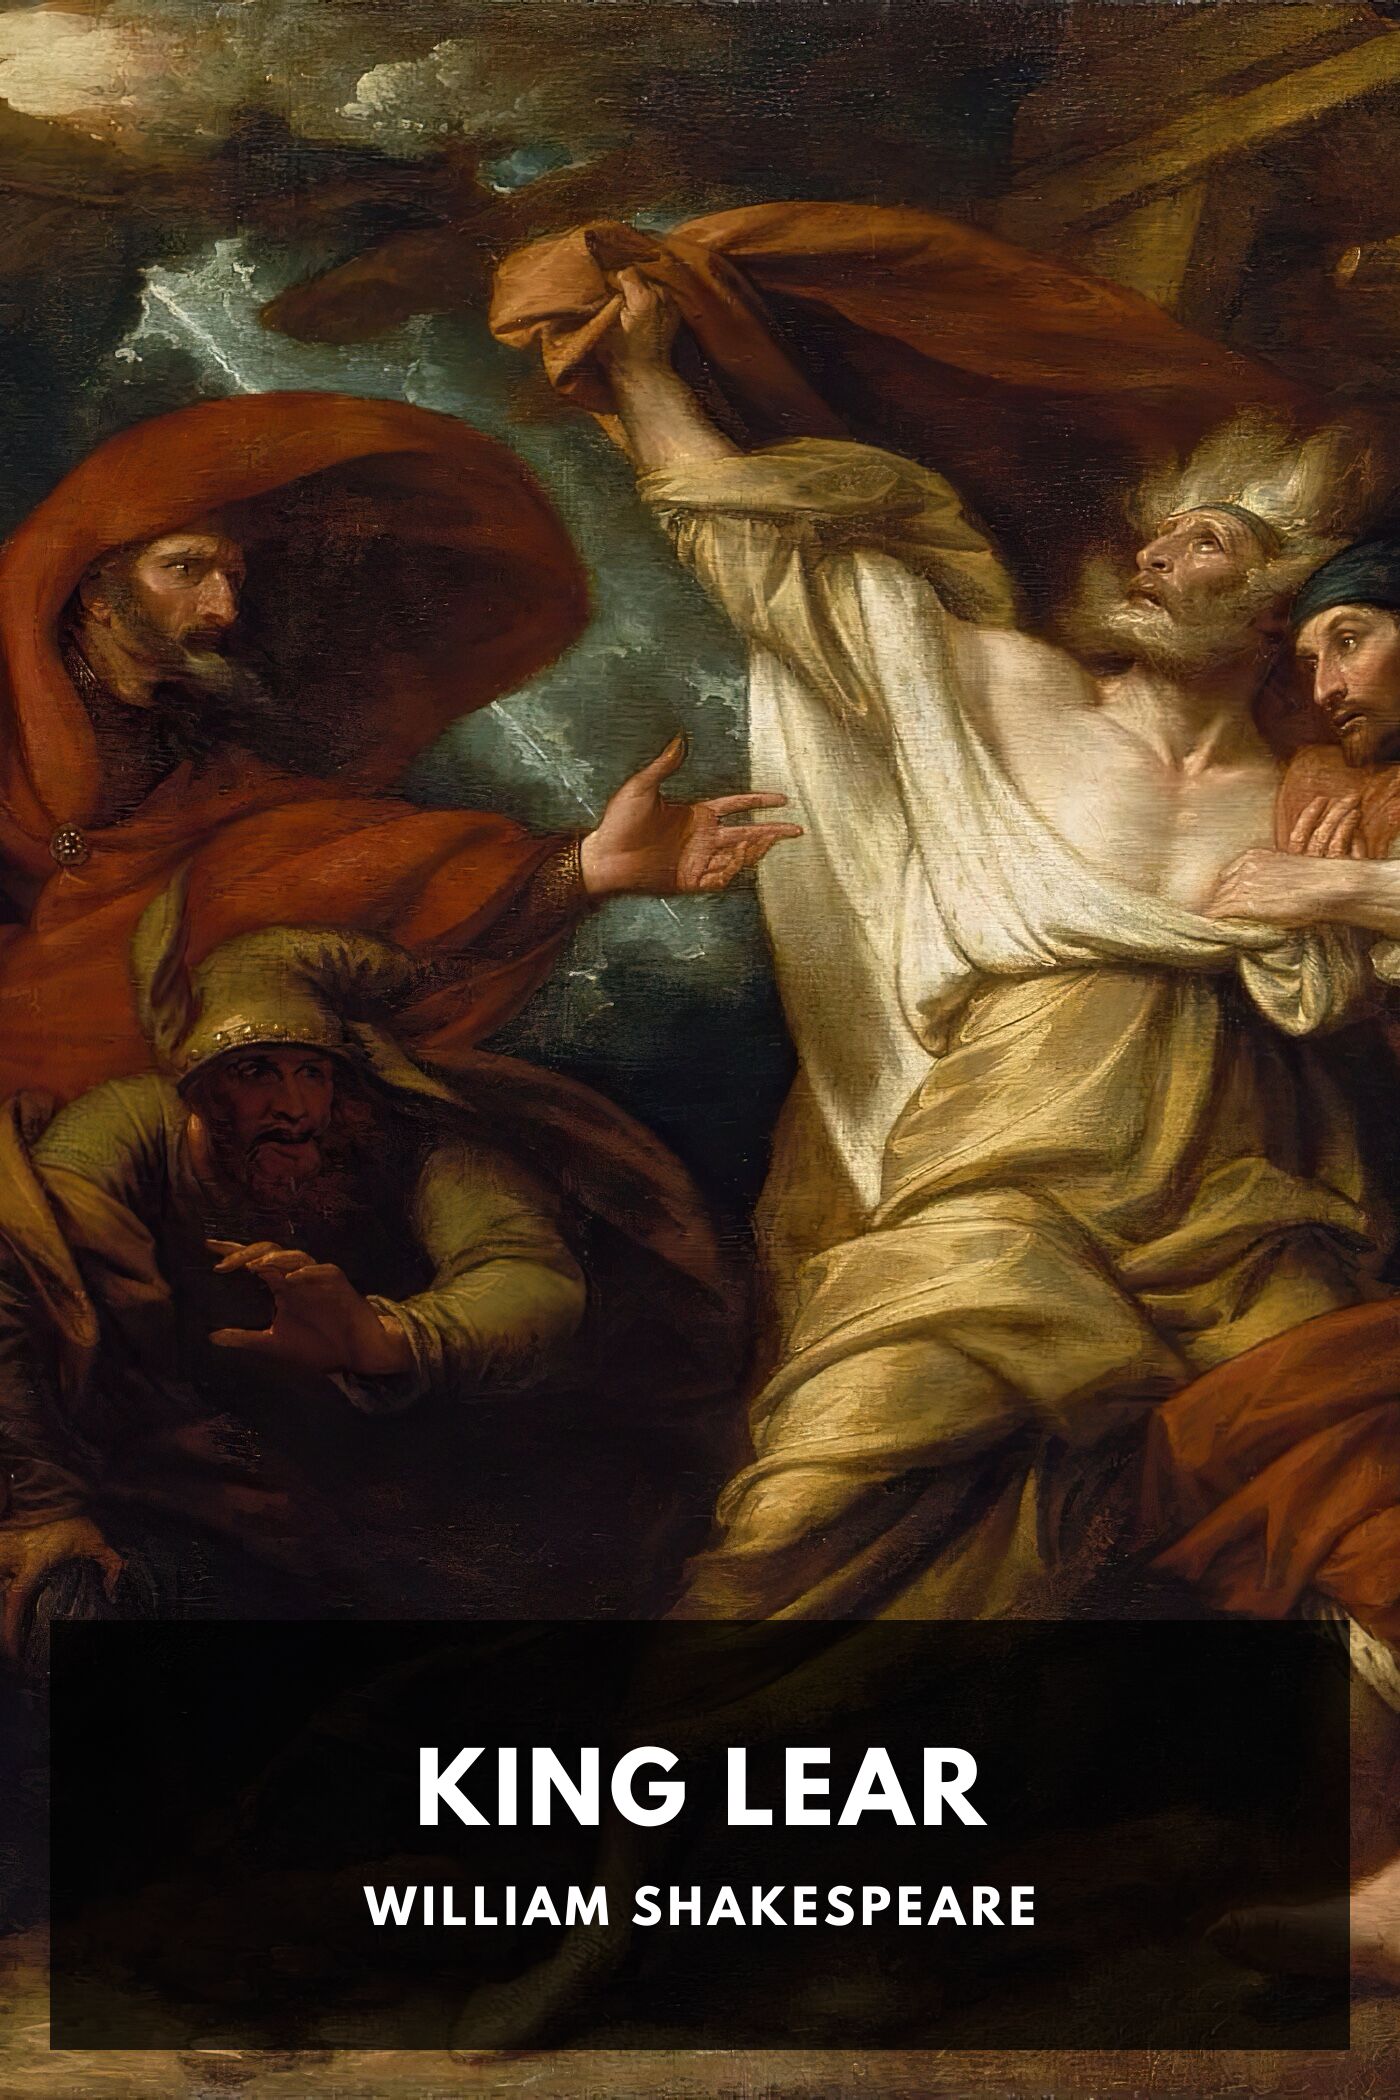 King Lear, by William Shakespeare - Free ebook download - Standard Ebooks:  Free and liberated ebooks, carefully produced for the true book lover.